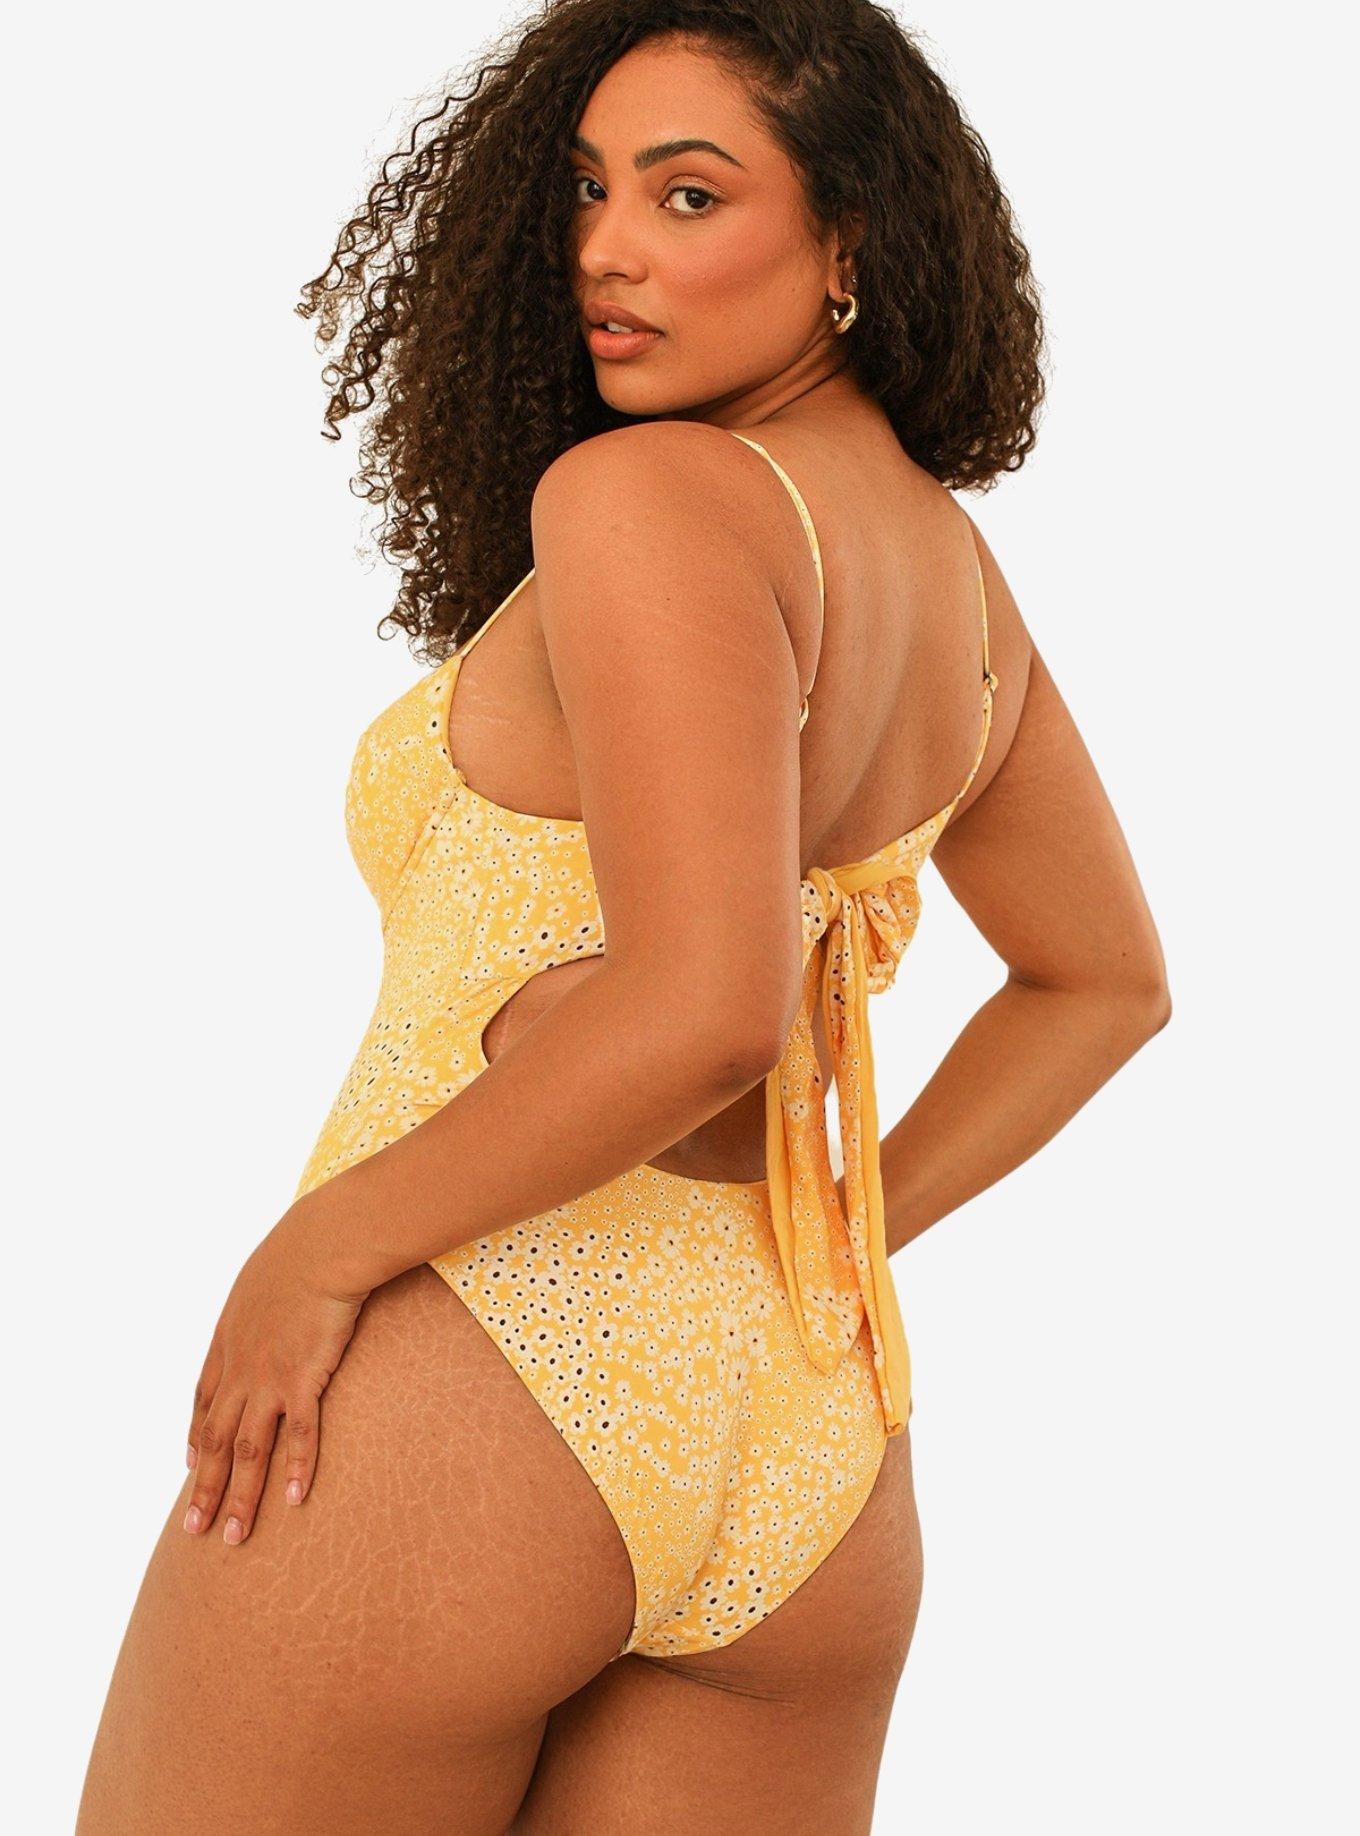 Dippin' Daisy's Saltwater Thigh High Swim One Piece Golden Ditsy, FLORAL - YELLOW, alternate